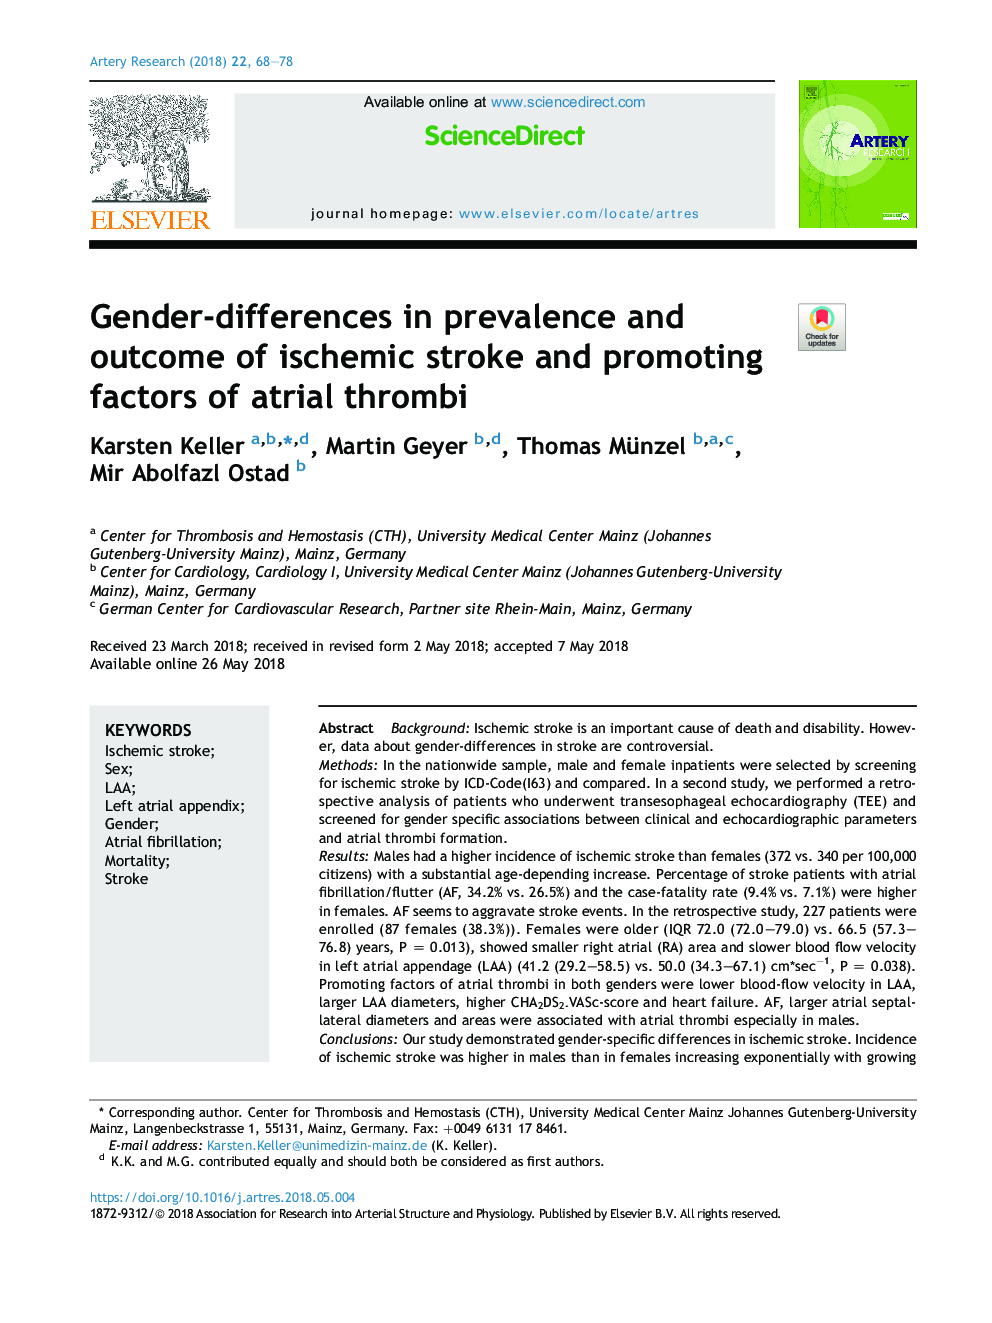 Gender-differences in prevalence and outcome of ischemic stroke and promoting factors of atrial thrombi